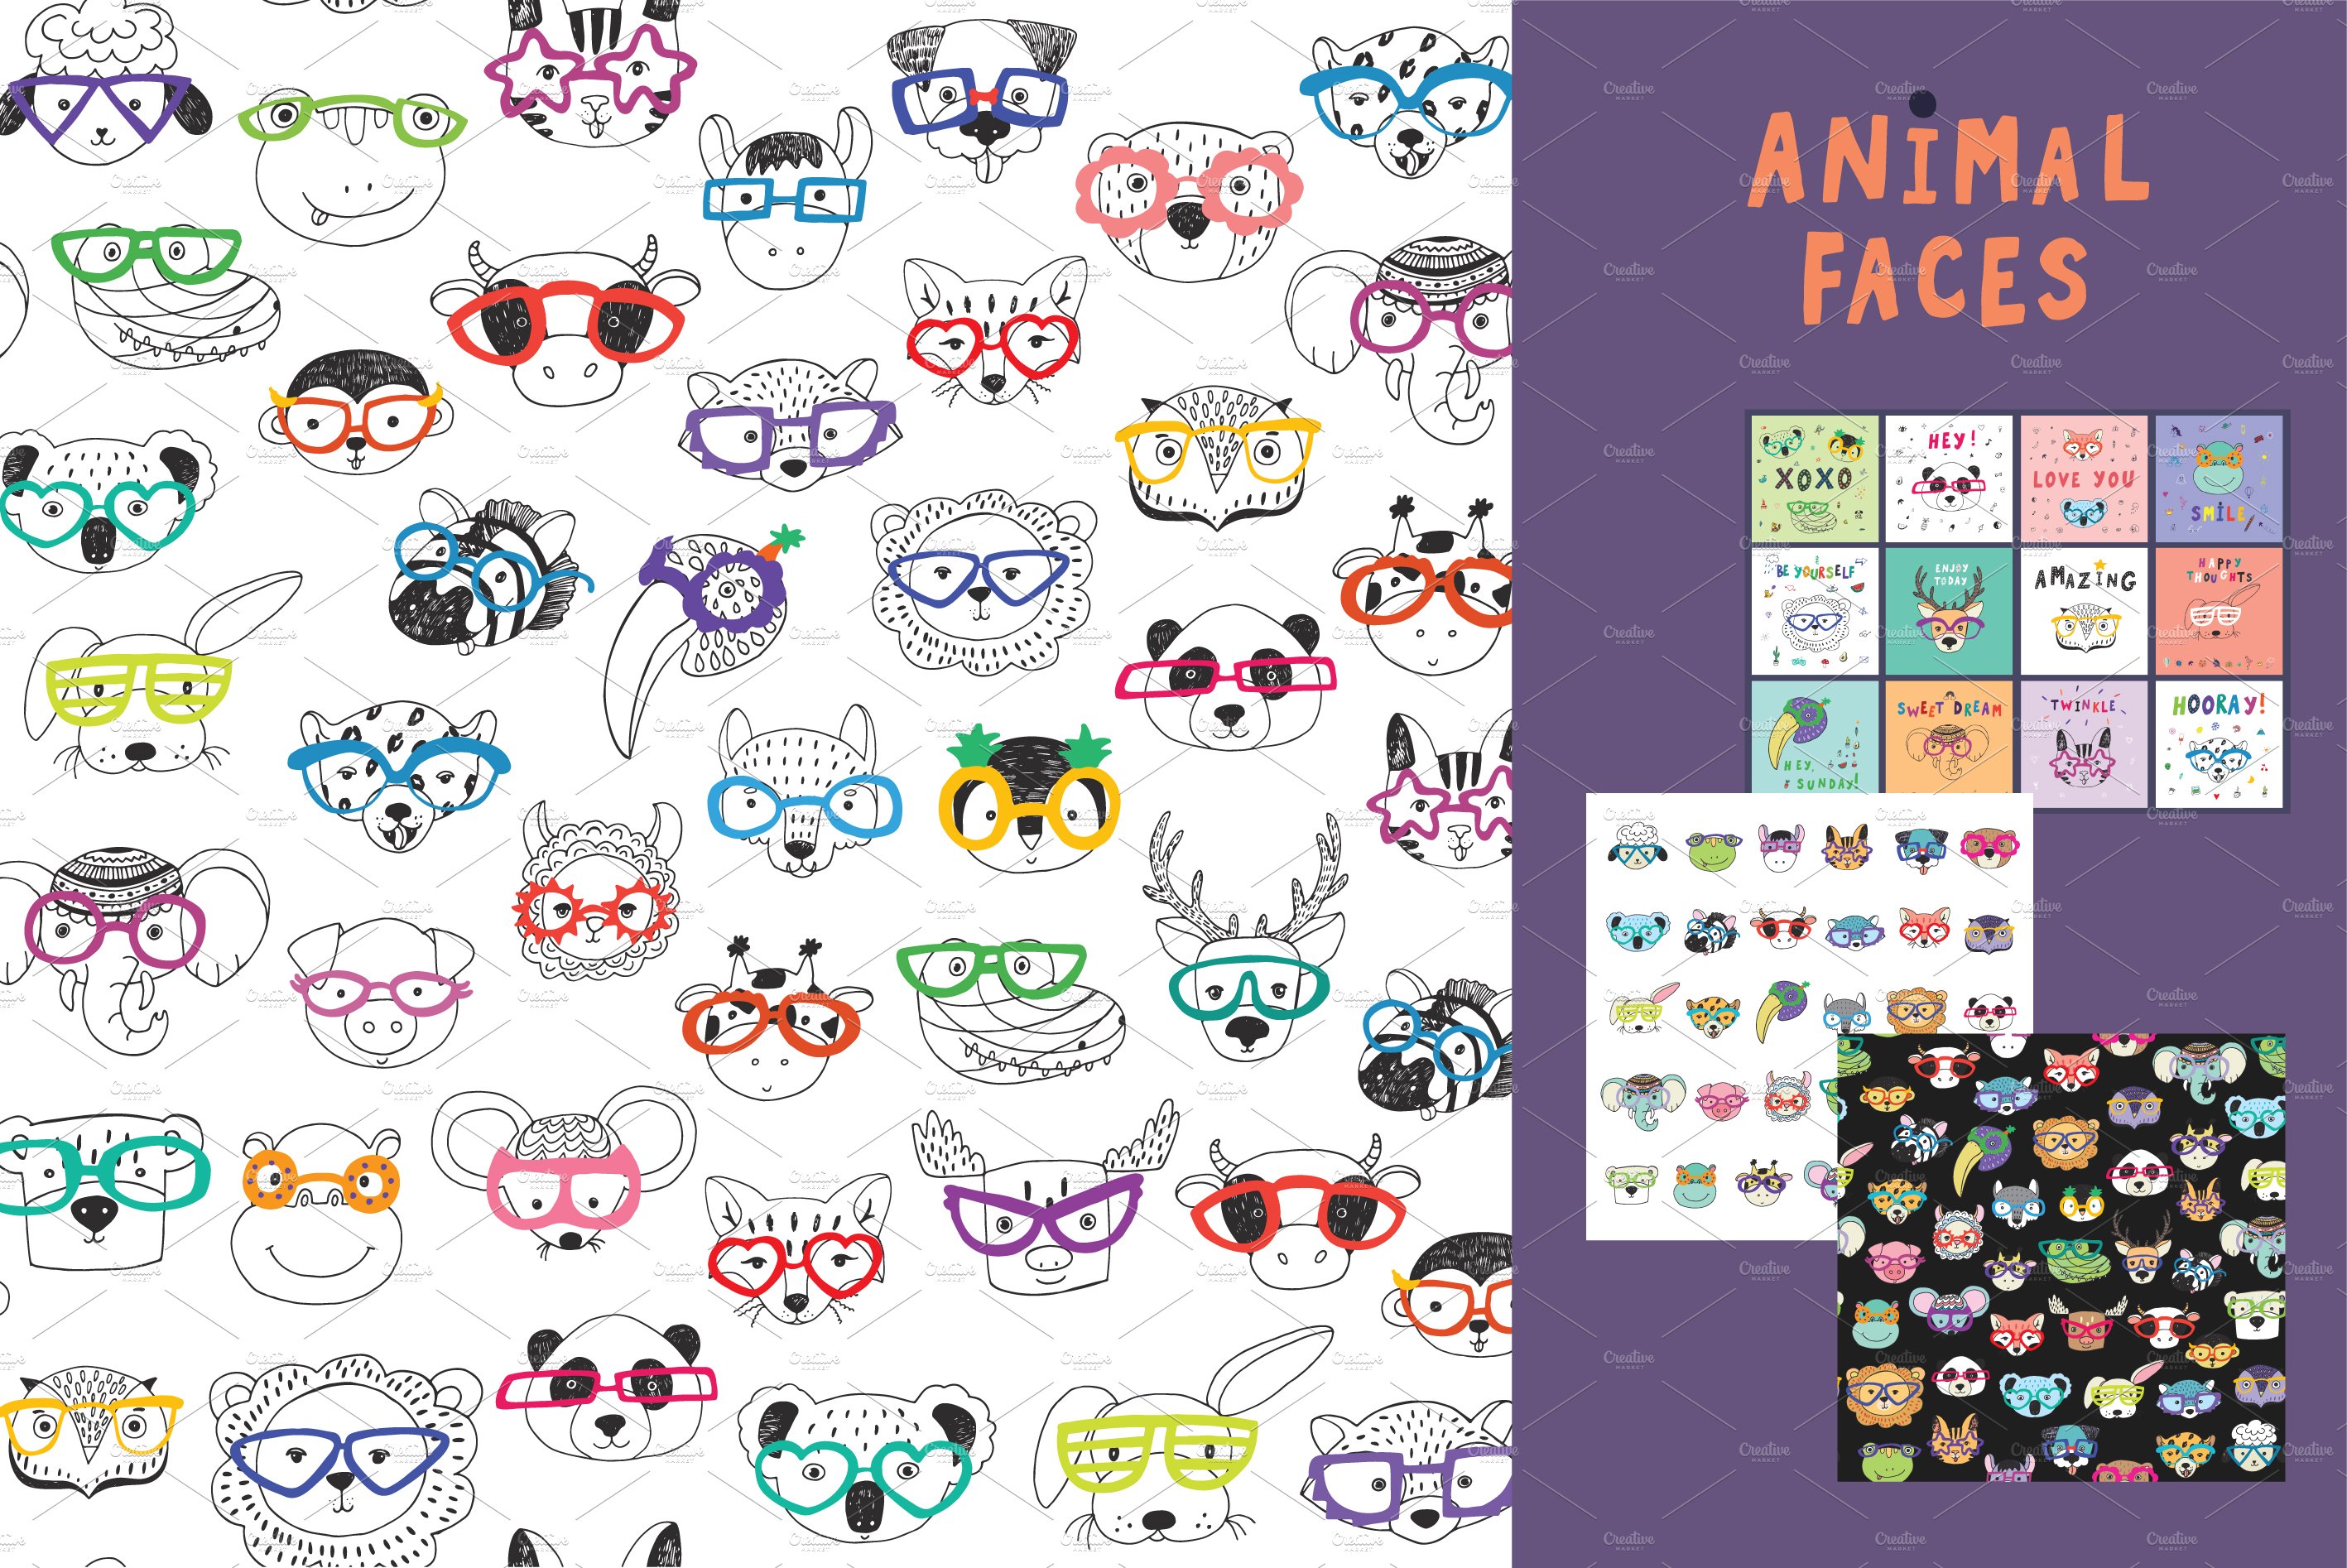 Animal Faces In Trendy Glasses cover image.